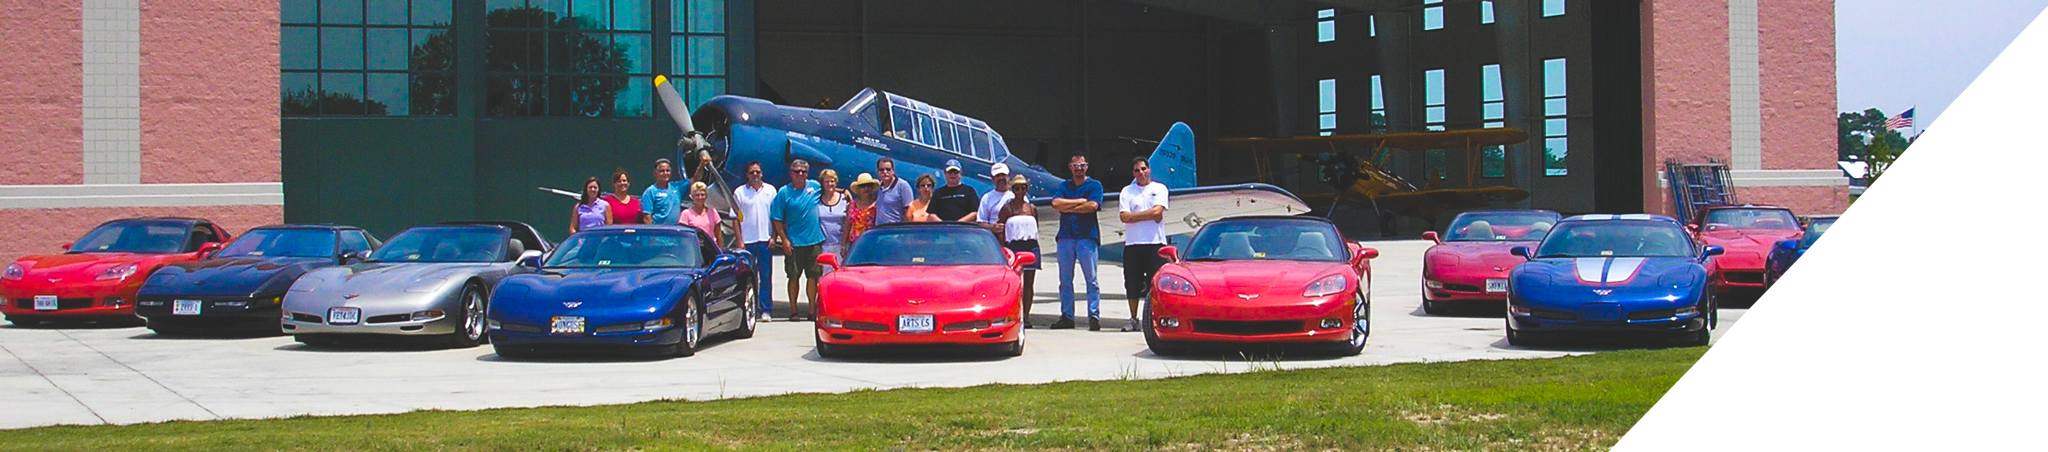 Beachombers Corvette Club Meets up at the aviation museum